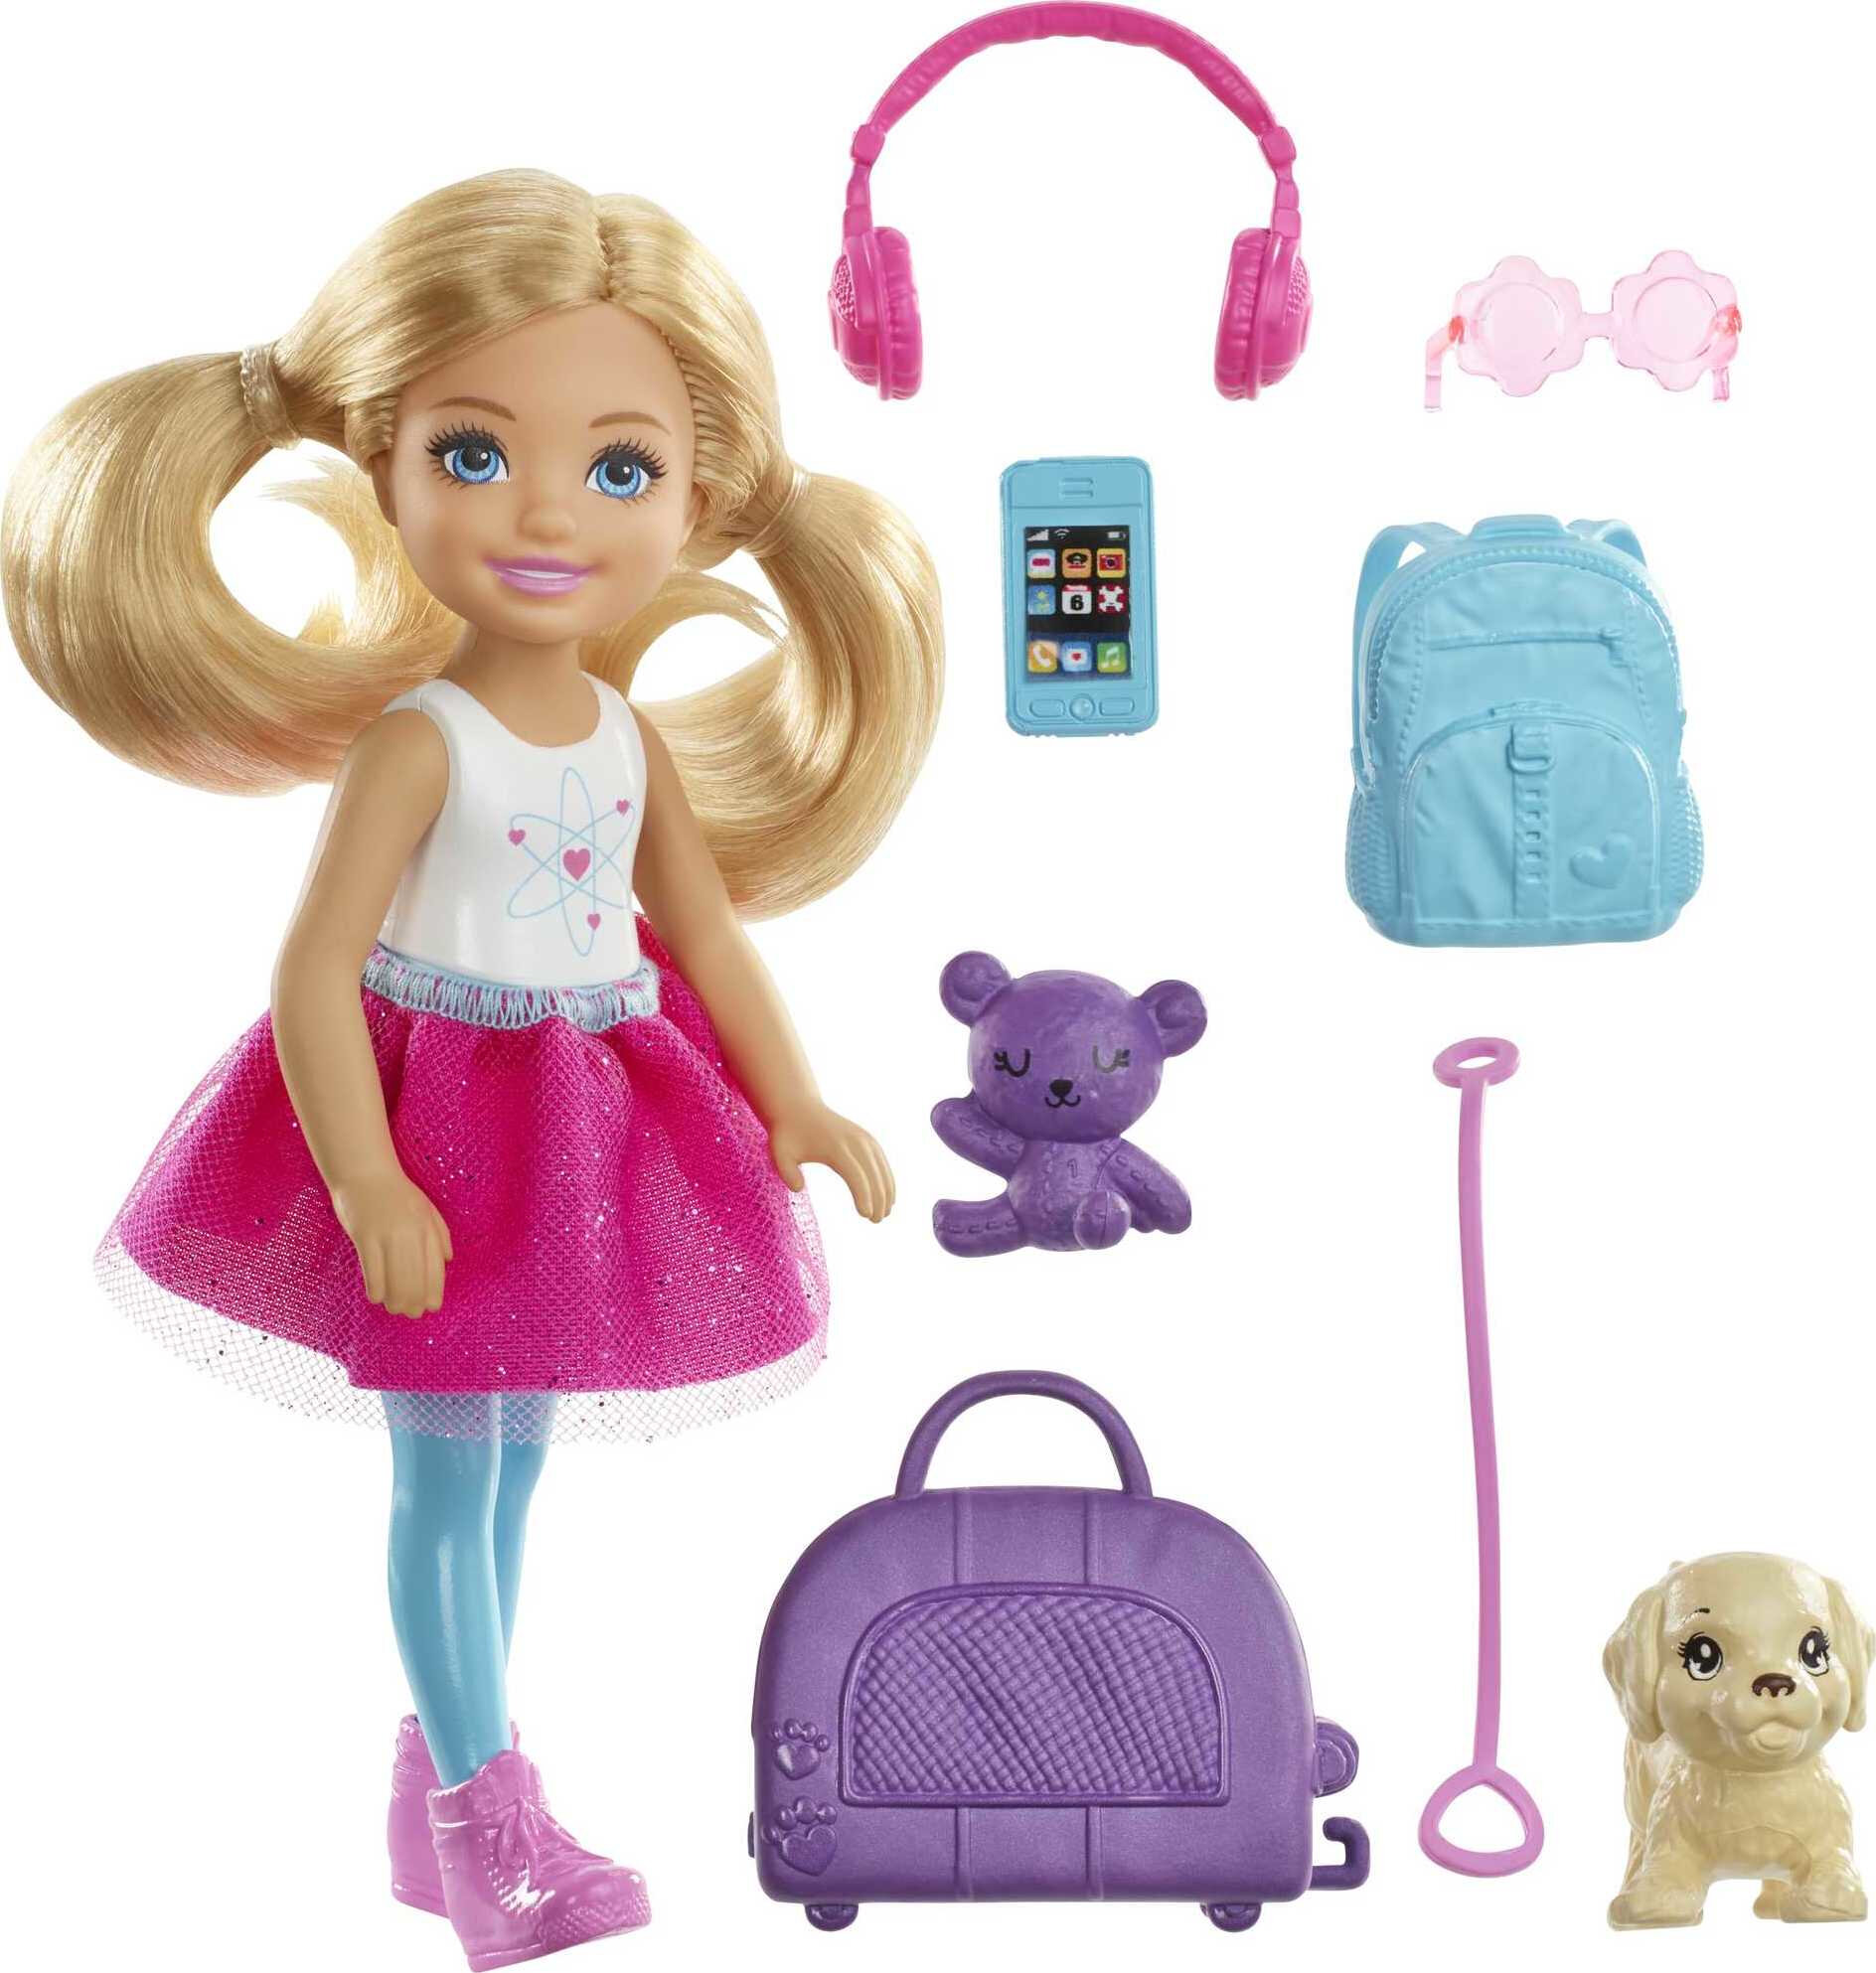 Barbie Dreamhouse Adventures Chelsea Doll & Accessories, Travel Set with Puppy, Blonde Small Doll - image 1 of 6